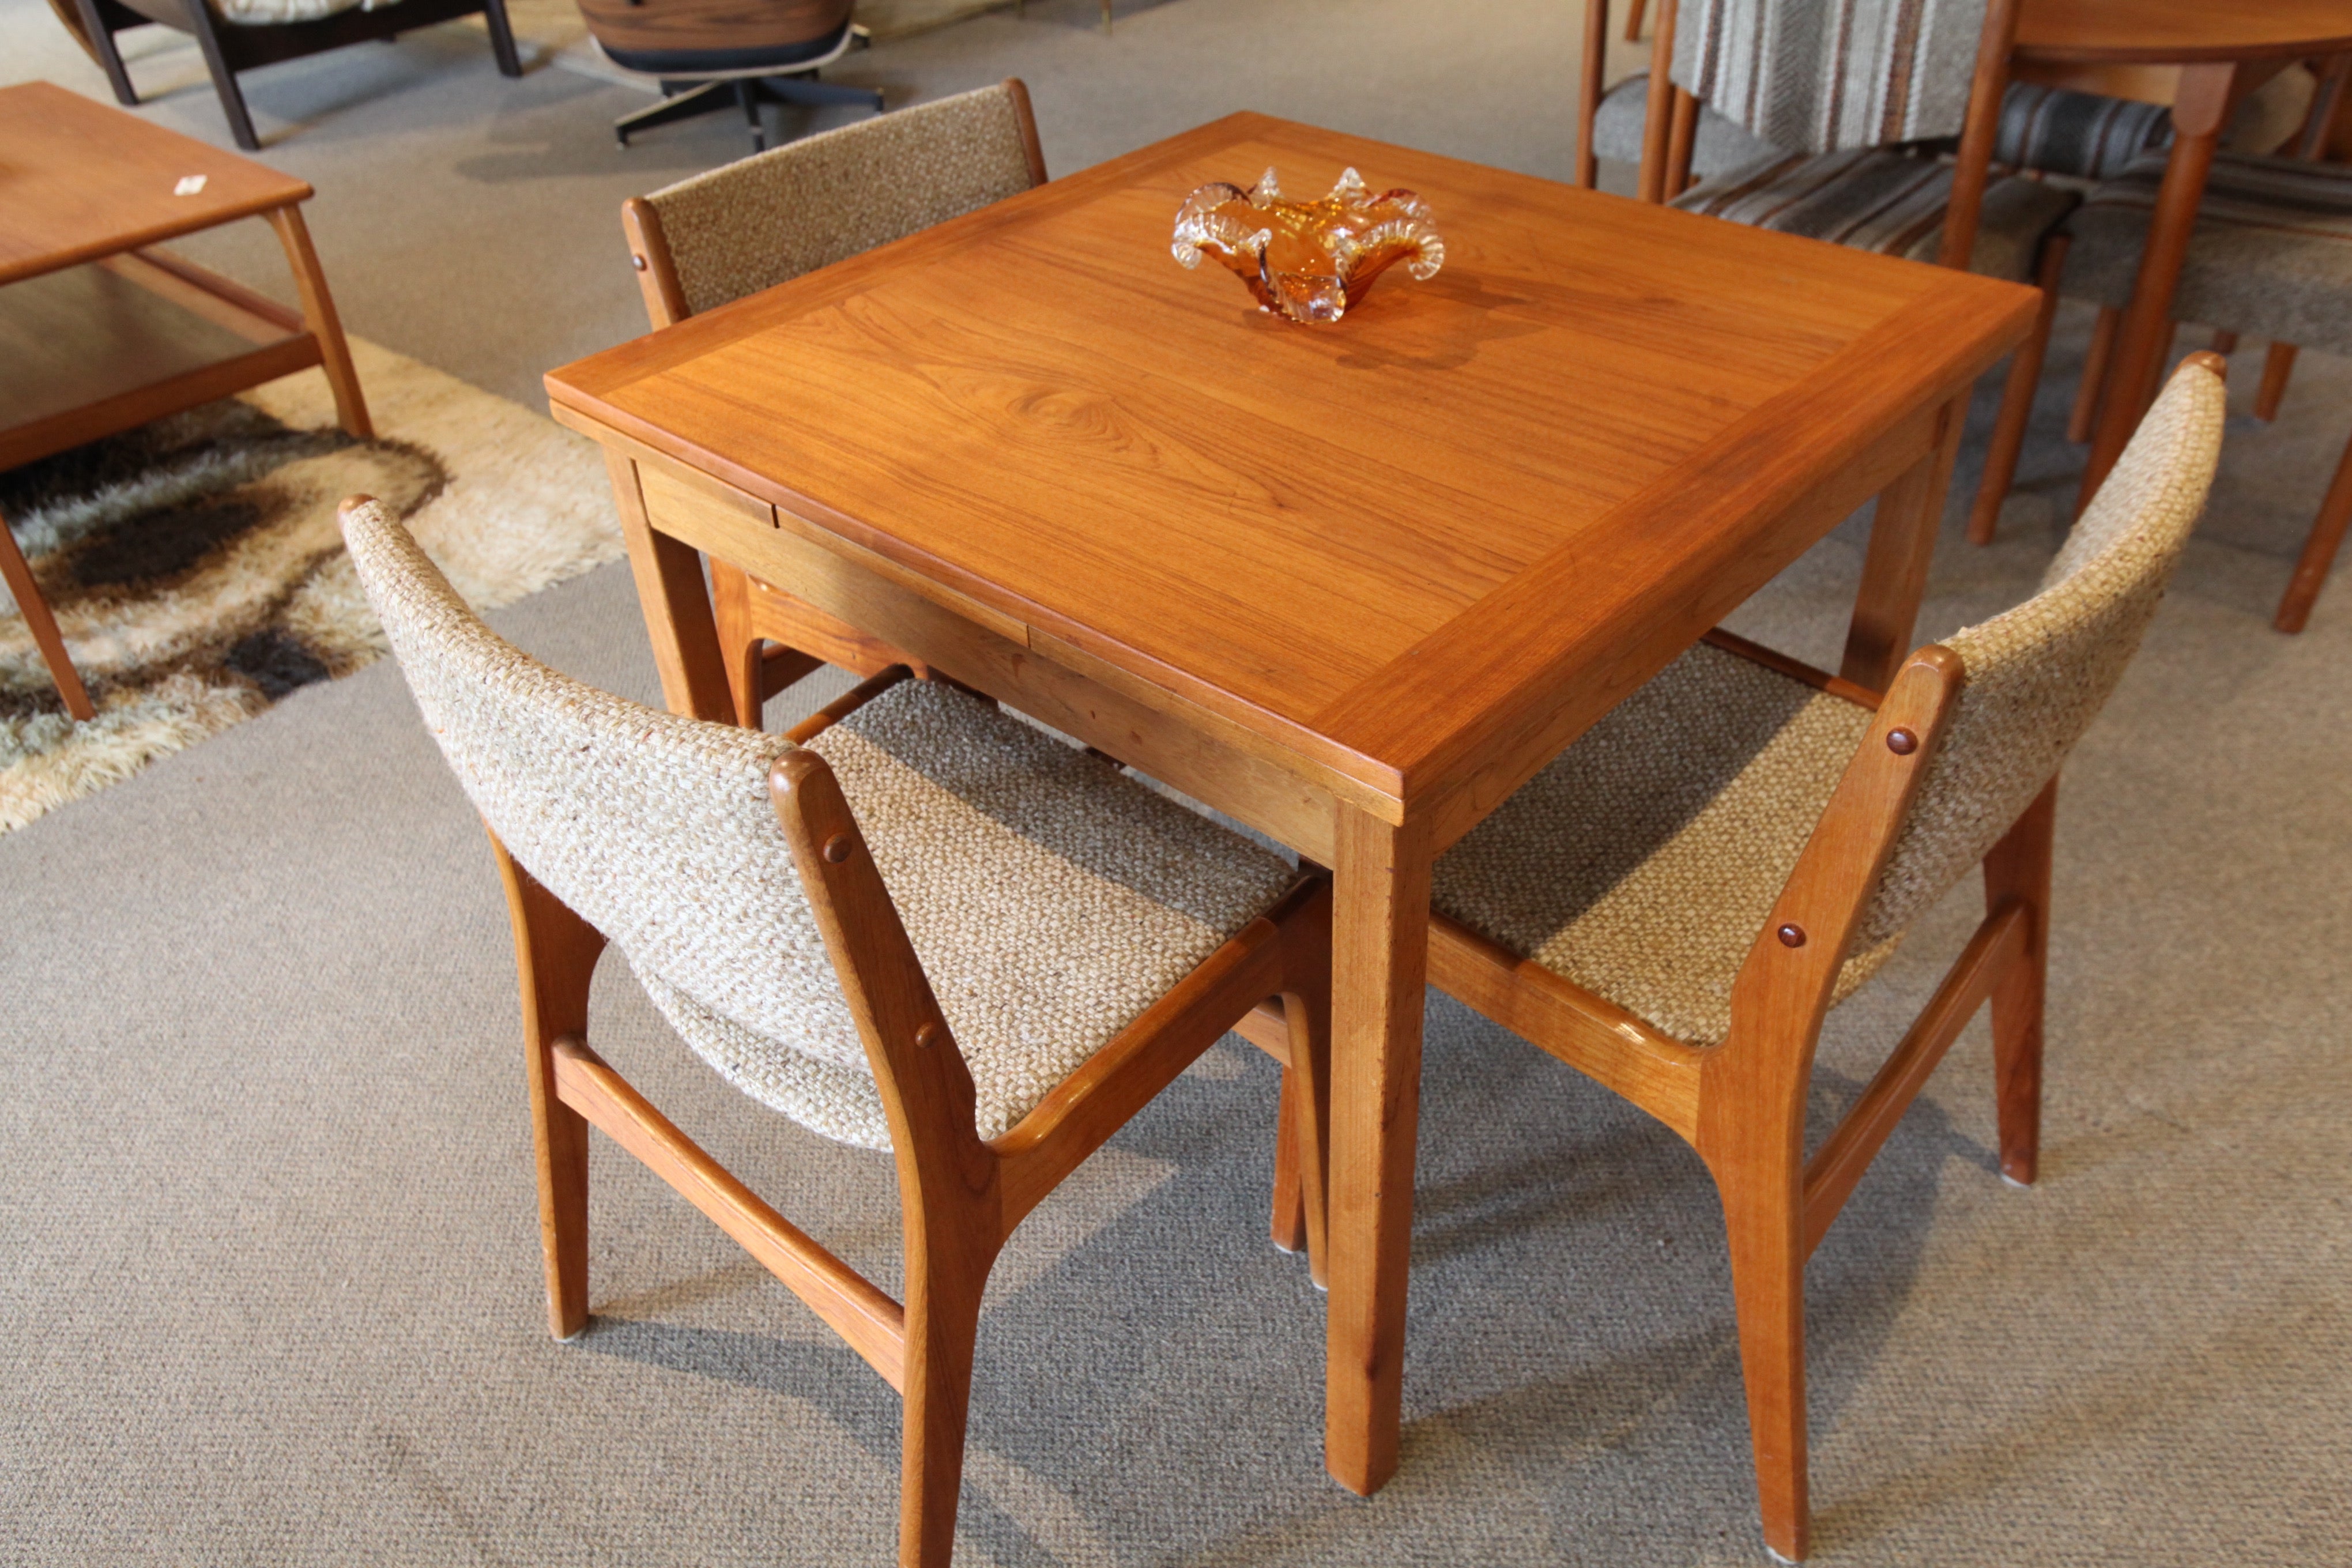 Small Danish Teak Table w/extensions (33" x 33") or (56" x 33")